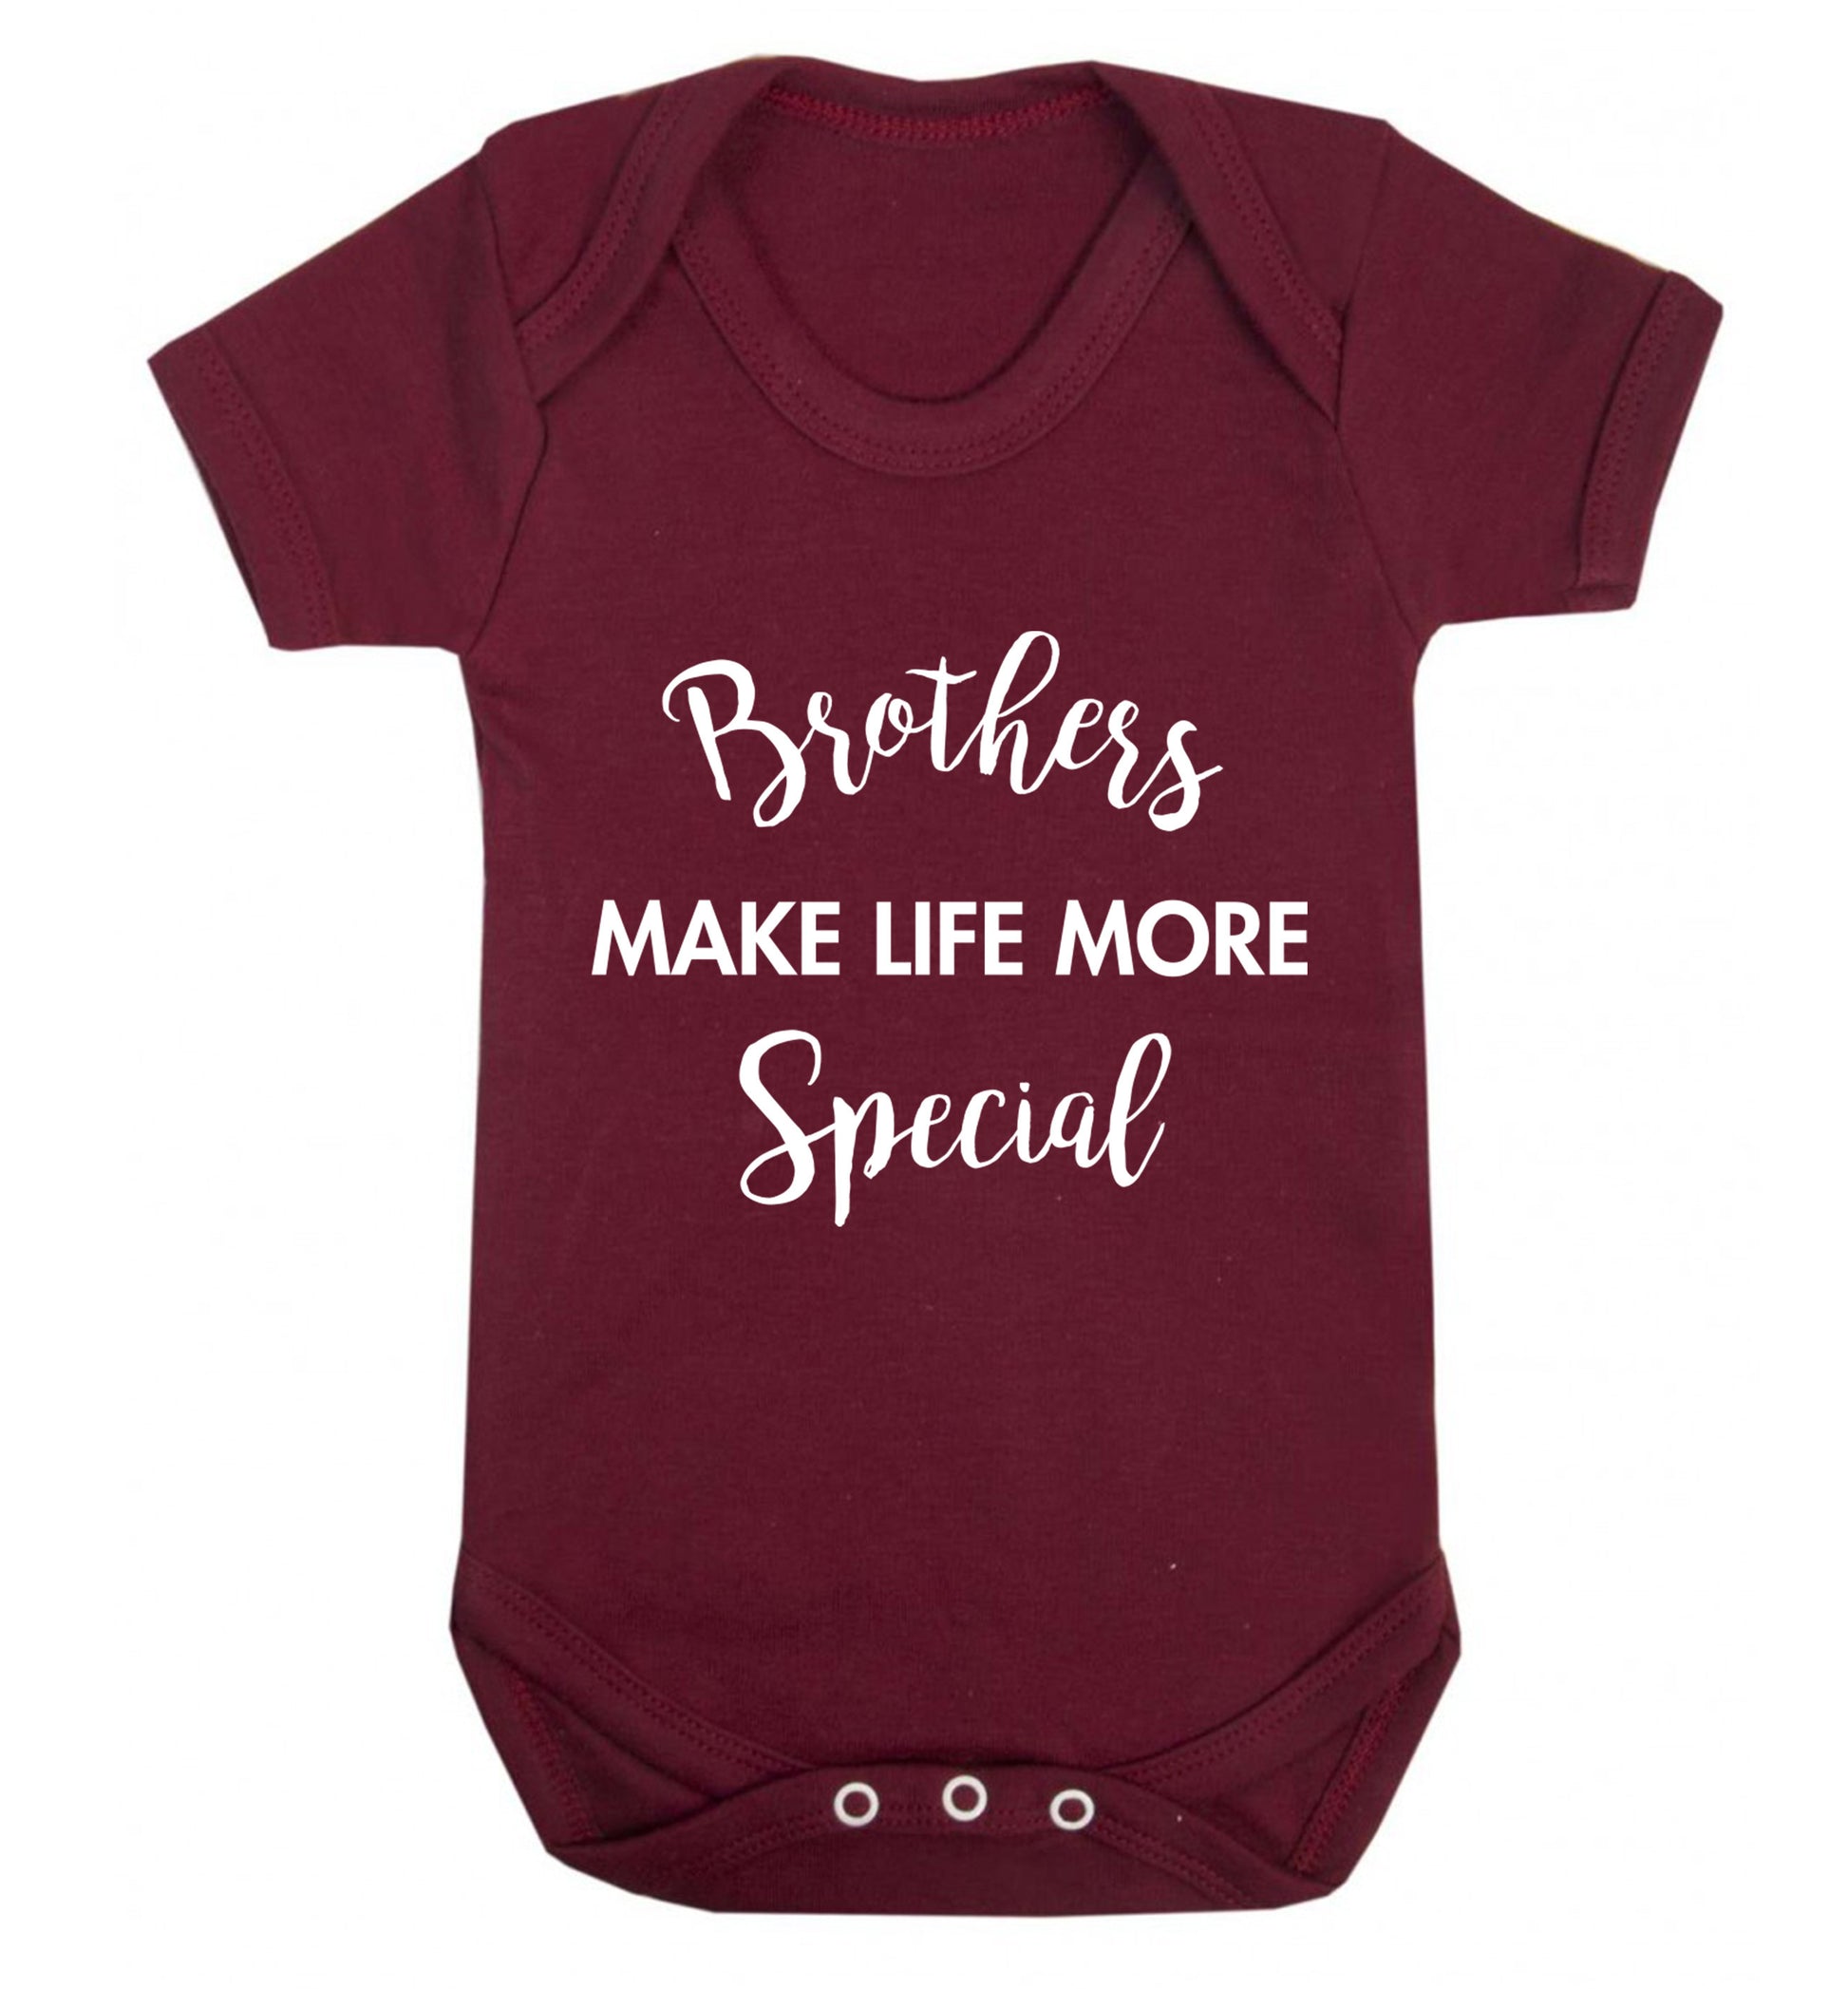 Brothers make life more special Baby Vest maroon 18-24 months